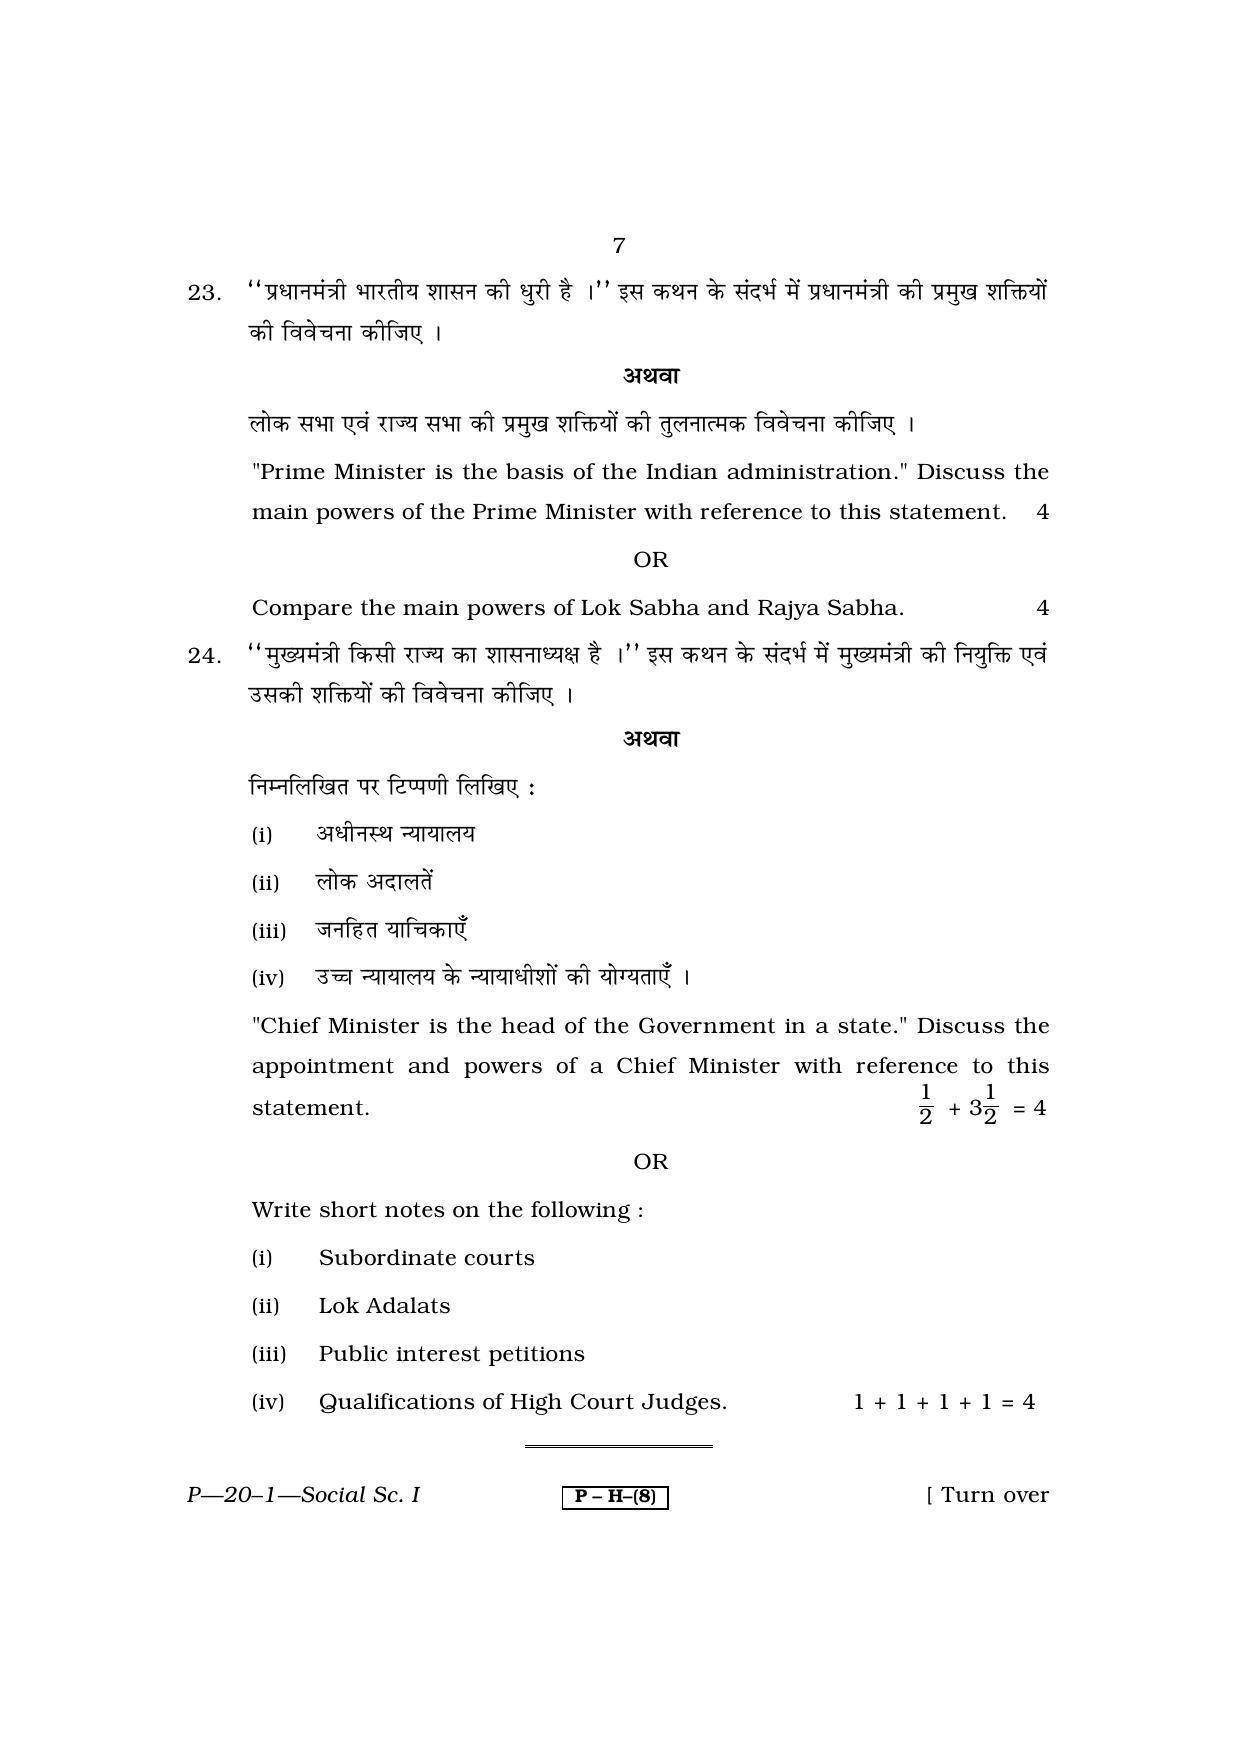 RBSE 2011 Social Science I Praveshika Question Paper - Page 7